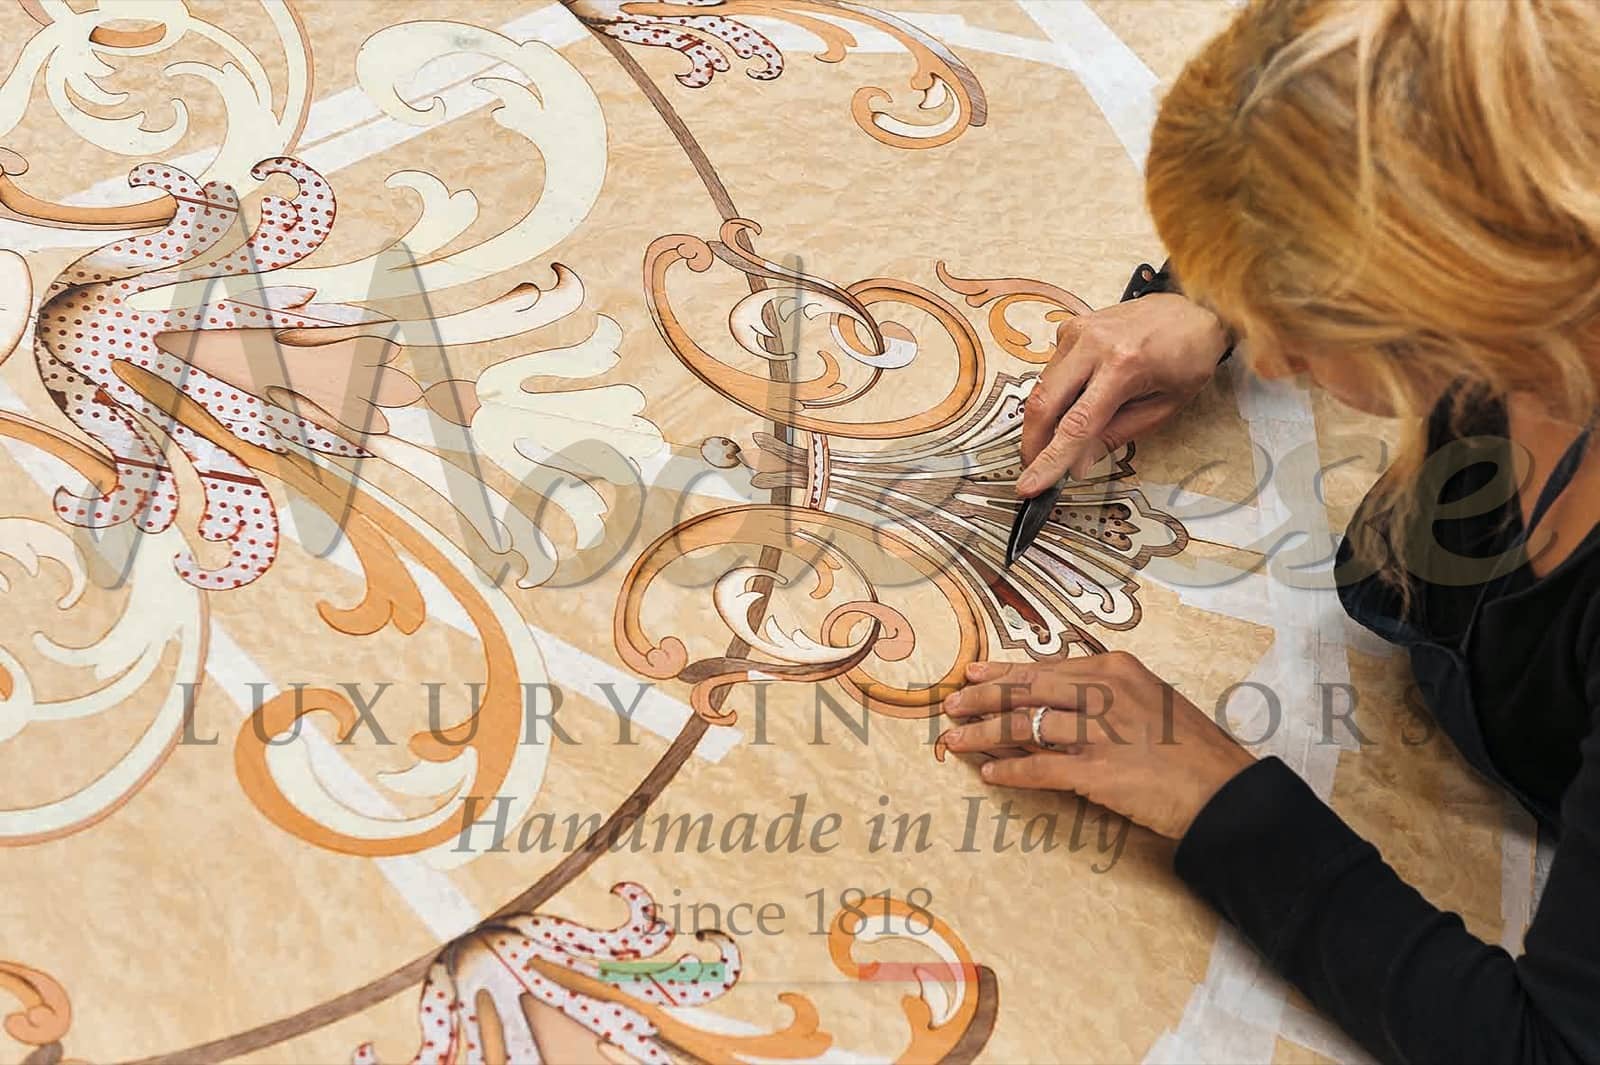 marquetry inlays luxurious handmade traditional furniture production made in Italy master artisans high end skills traditions Italian Venetian craftsmanship elegant interior design ideas customized personalized